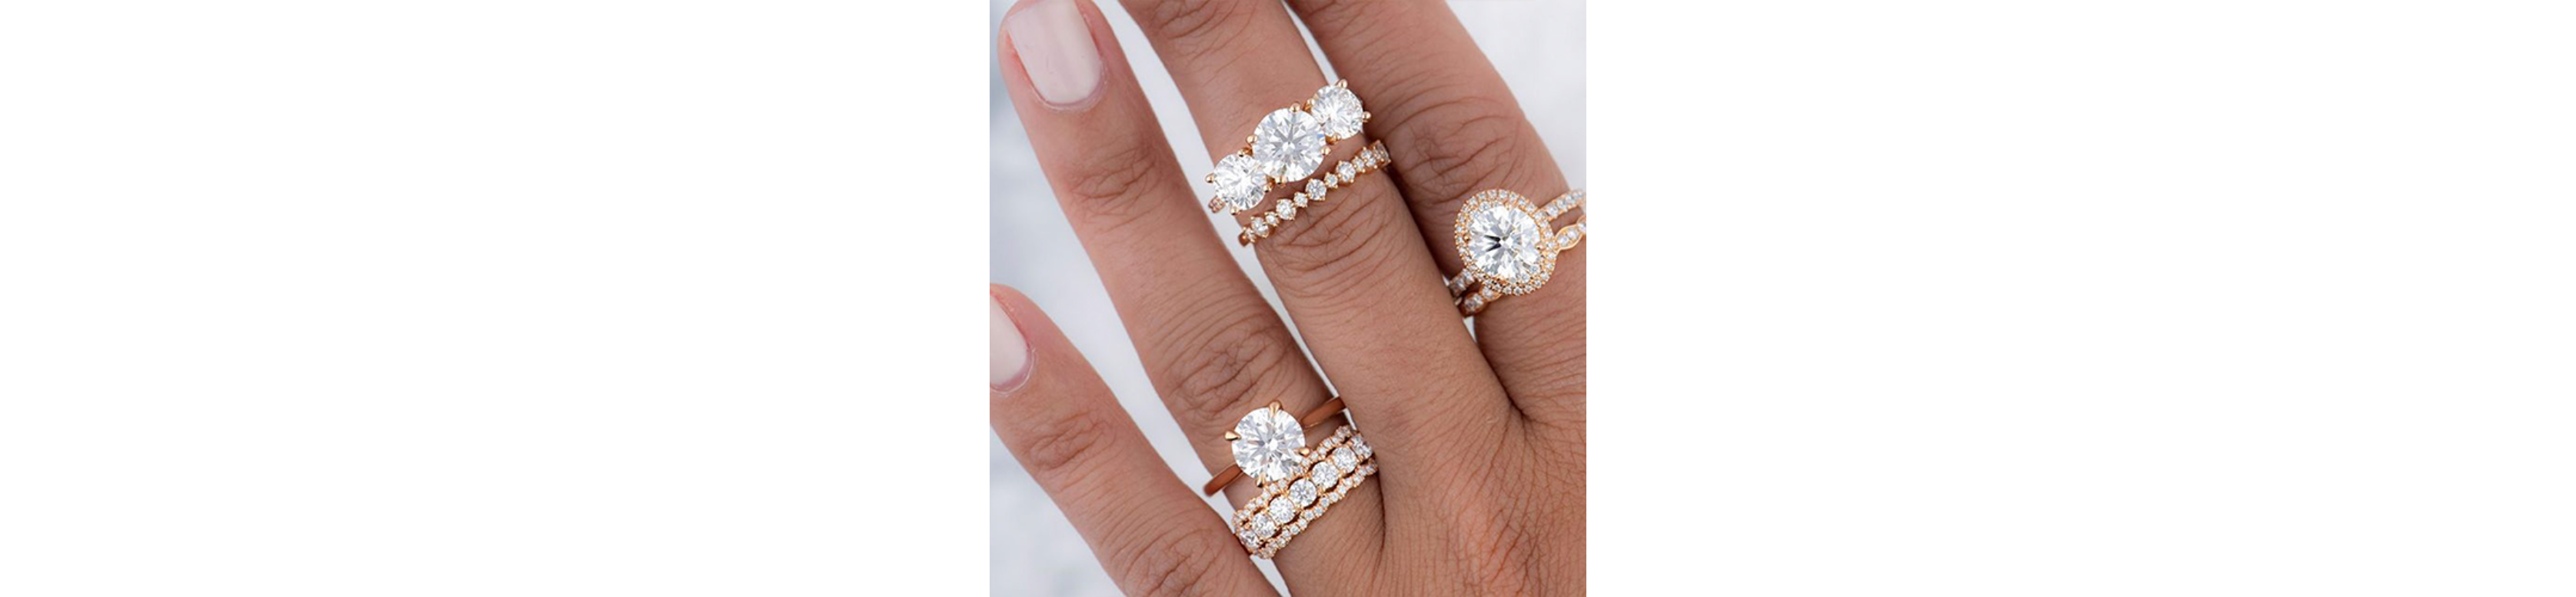 Can Diamond Rings Get Scratched?